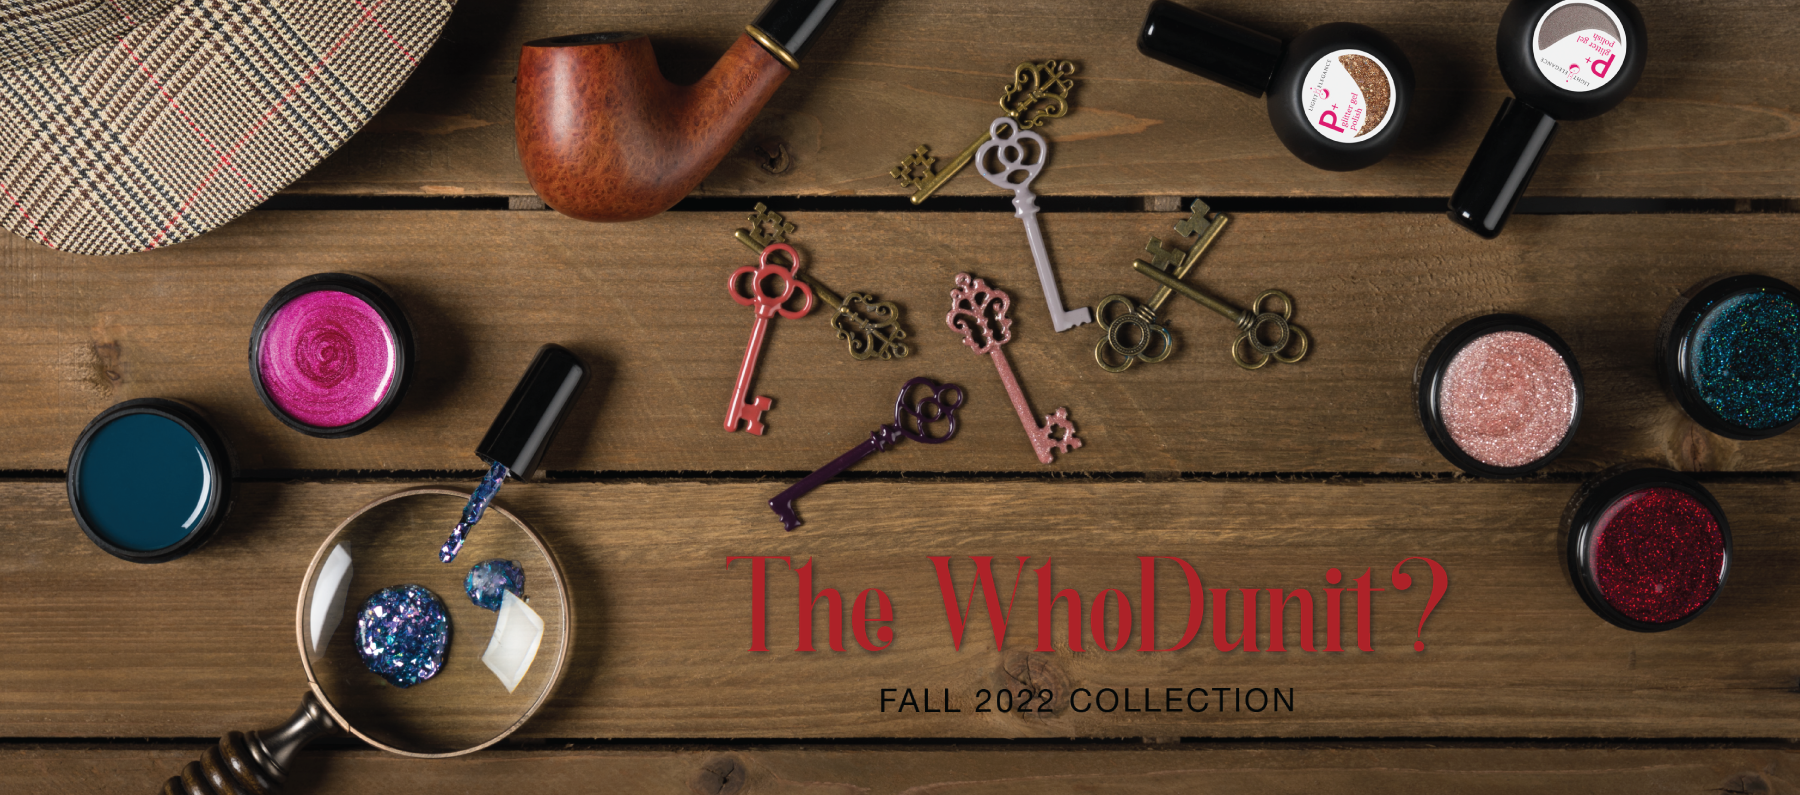 NEW Fall 2022 The WhoDunit? P+/CG/GG Collection | 12 Brand-New Shades by Light Elegance